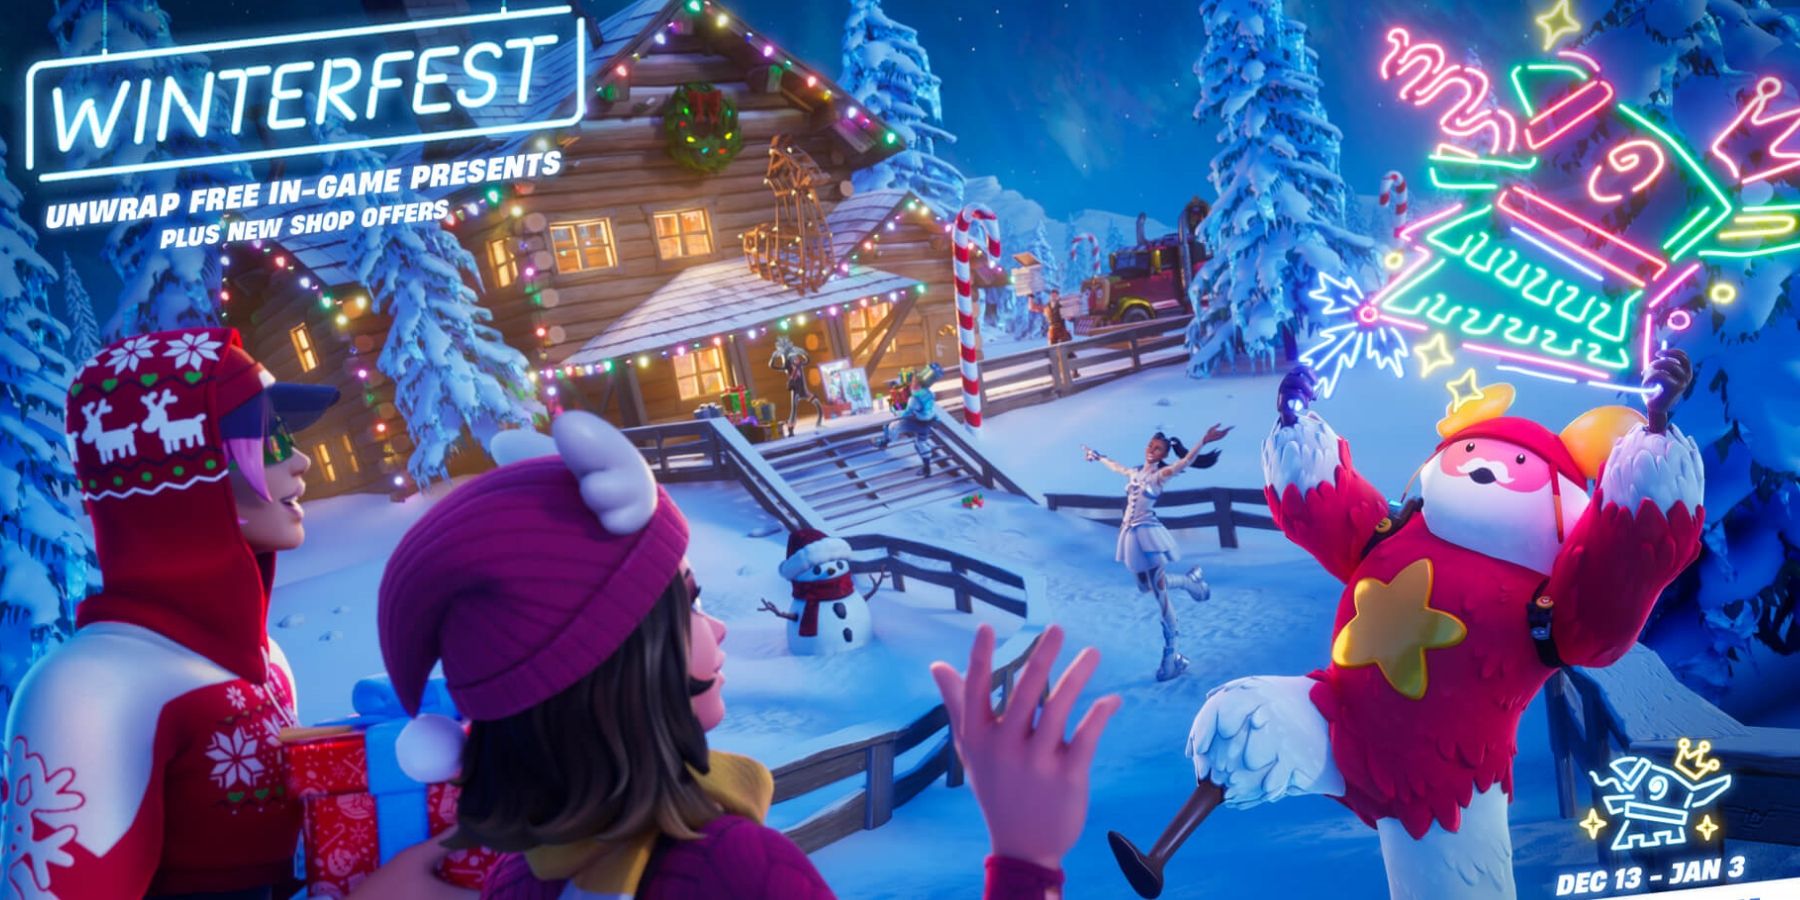 Fortnite Winterfest 2022 Returns with Free Rewards, Unvaulted Weapons, and More